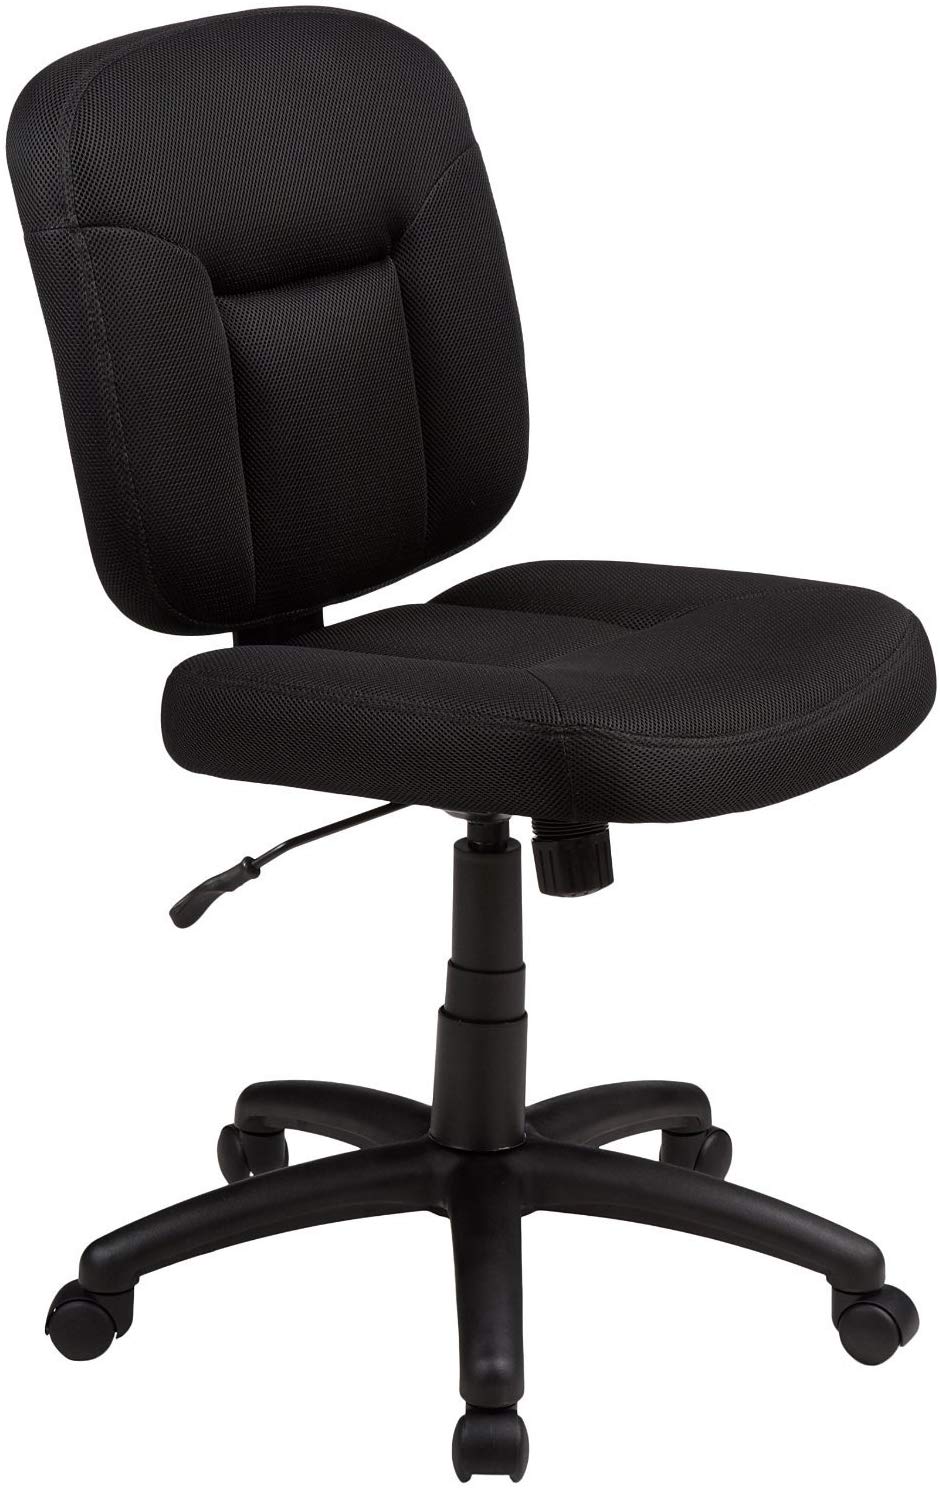 Amazon Basics Low-Back Computer Task Office Desk Chair with Swivel